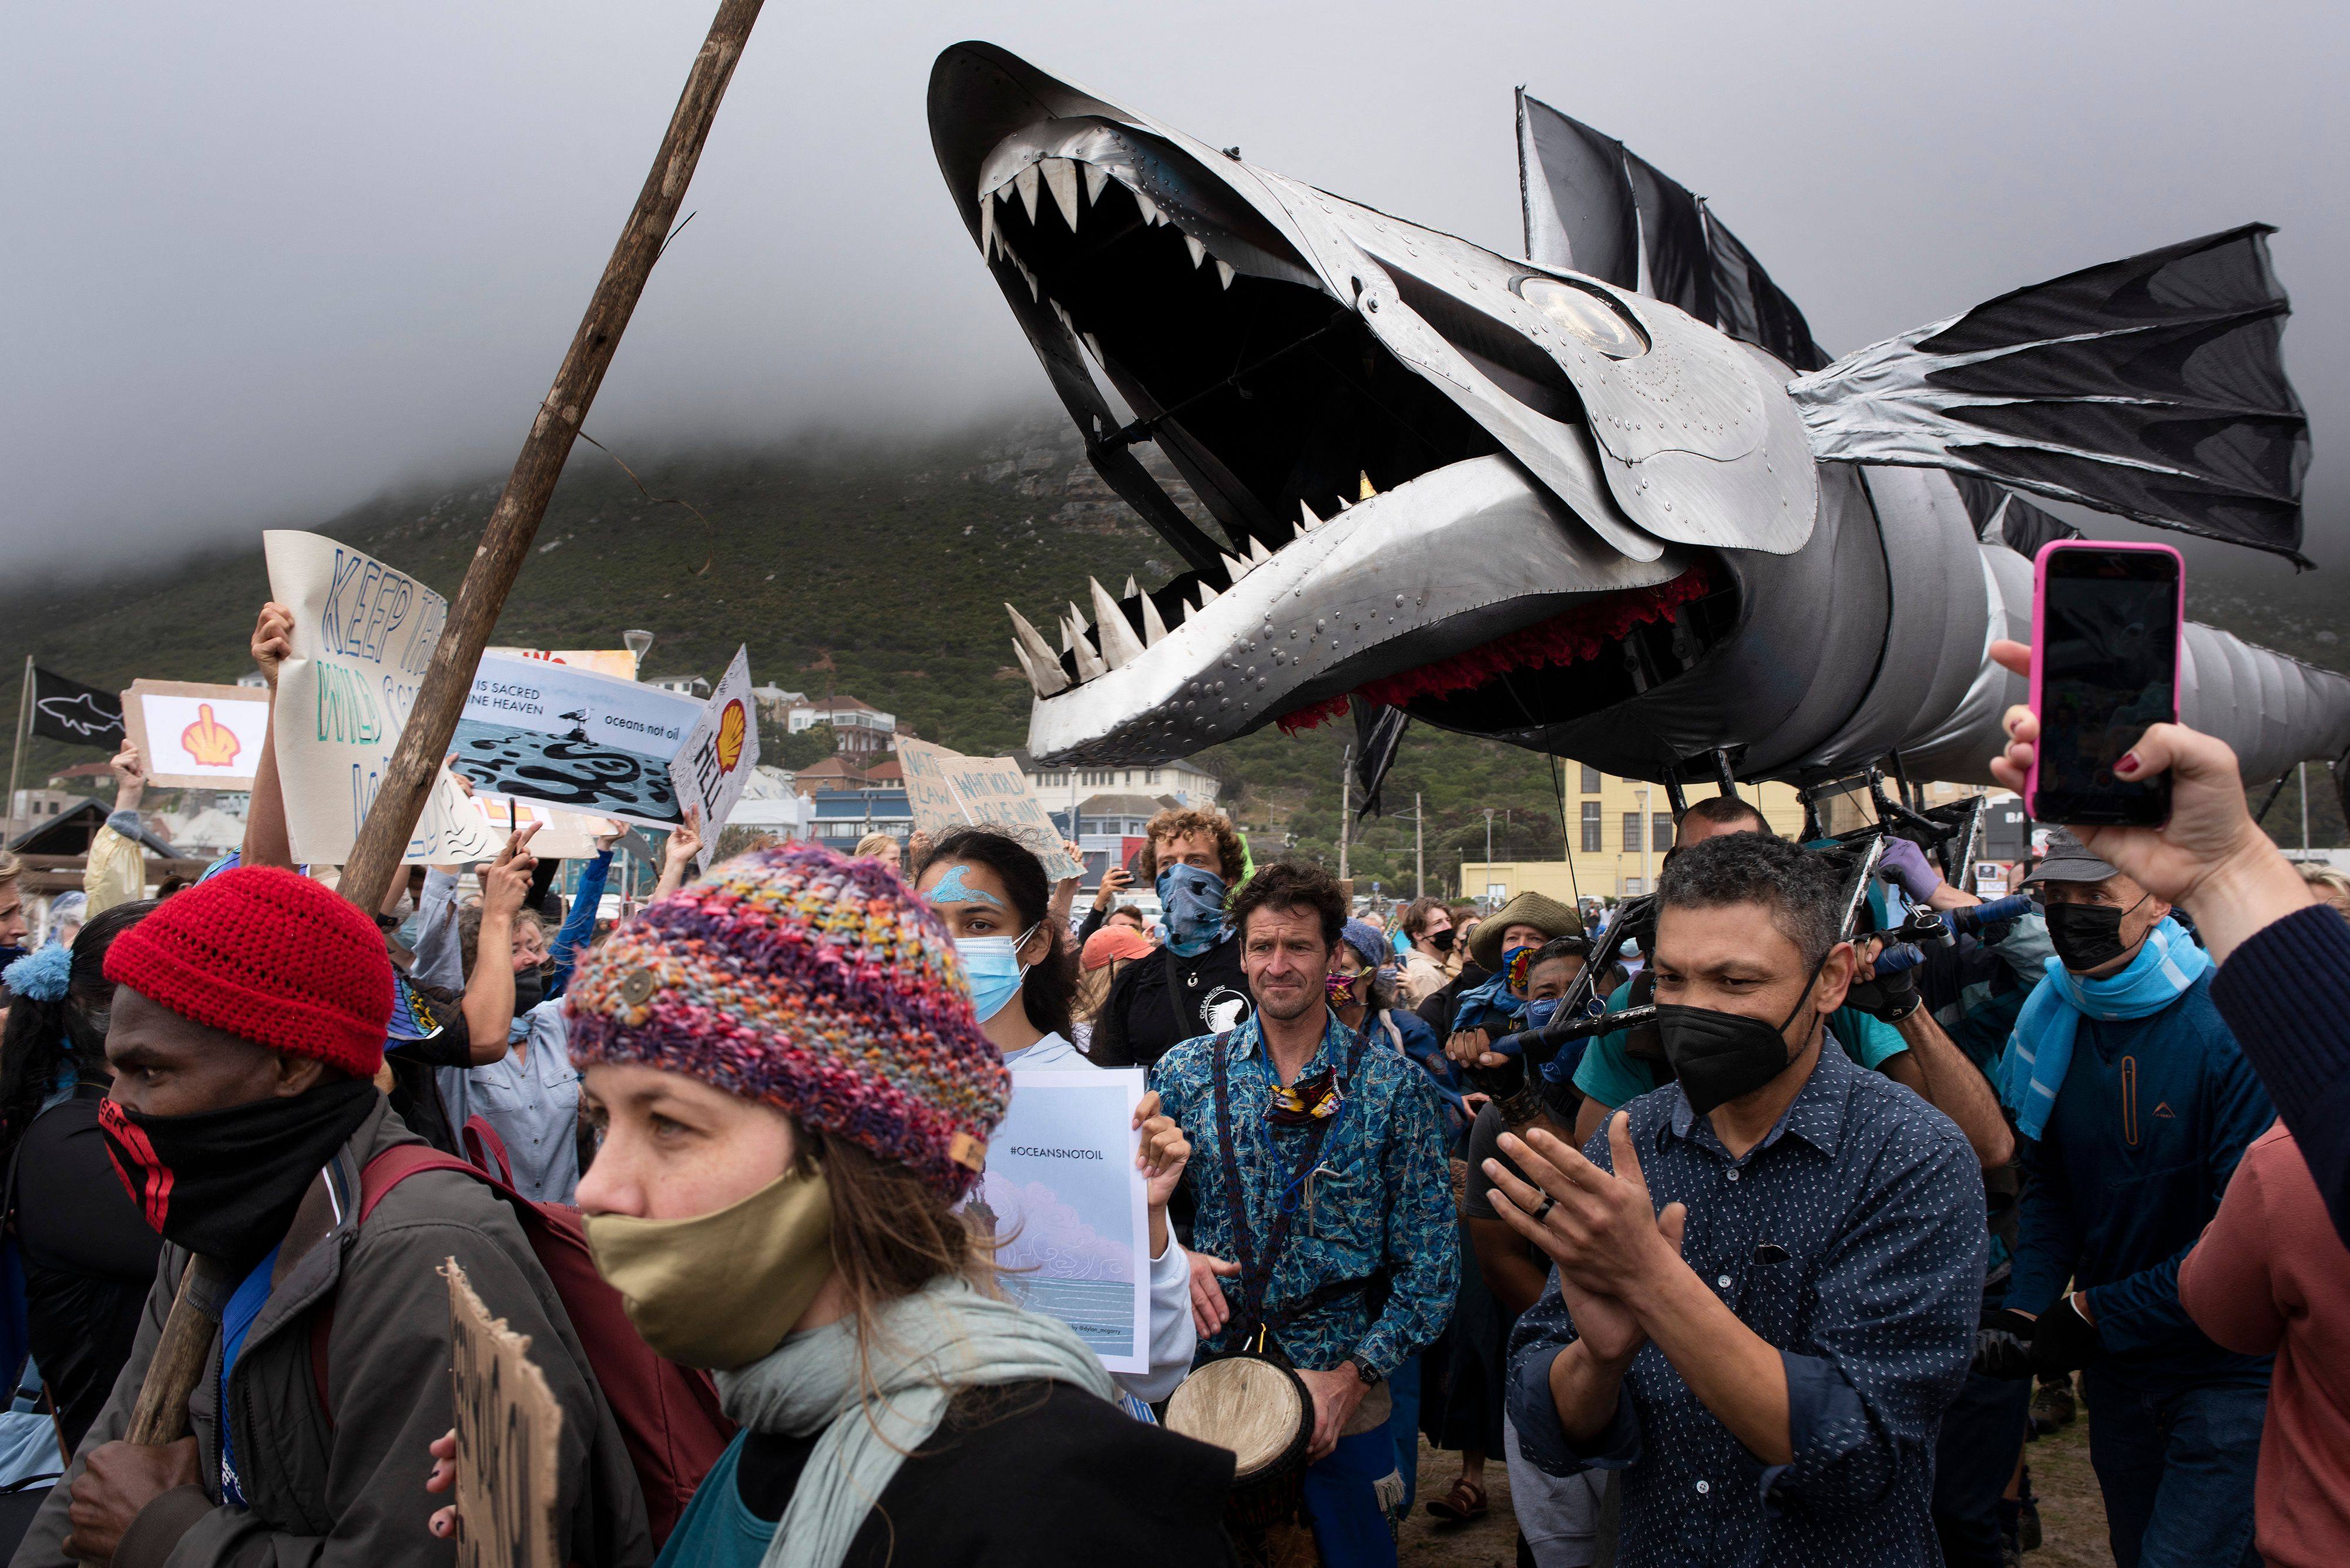 A giant puppet of a snoek, a type of mackerel, is displayed as hundreds of people take part in a protest against Dutch oil company Shell at Muizenberg Beach, Cape Town, South Africa on Sunday. Photo: AFP